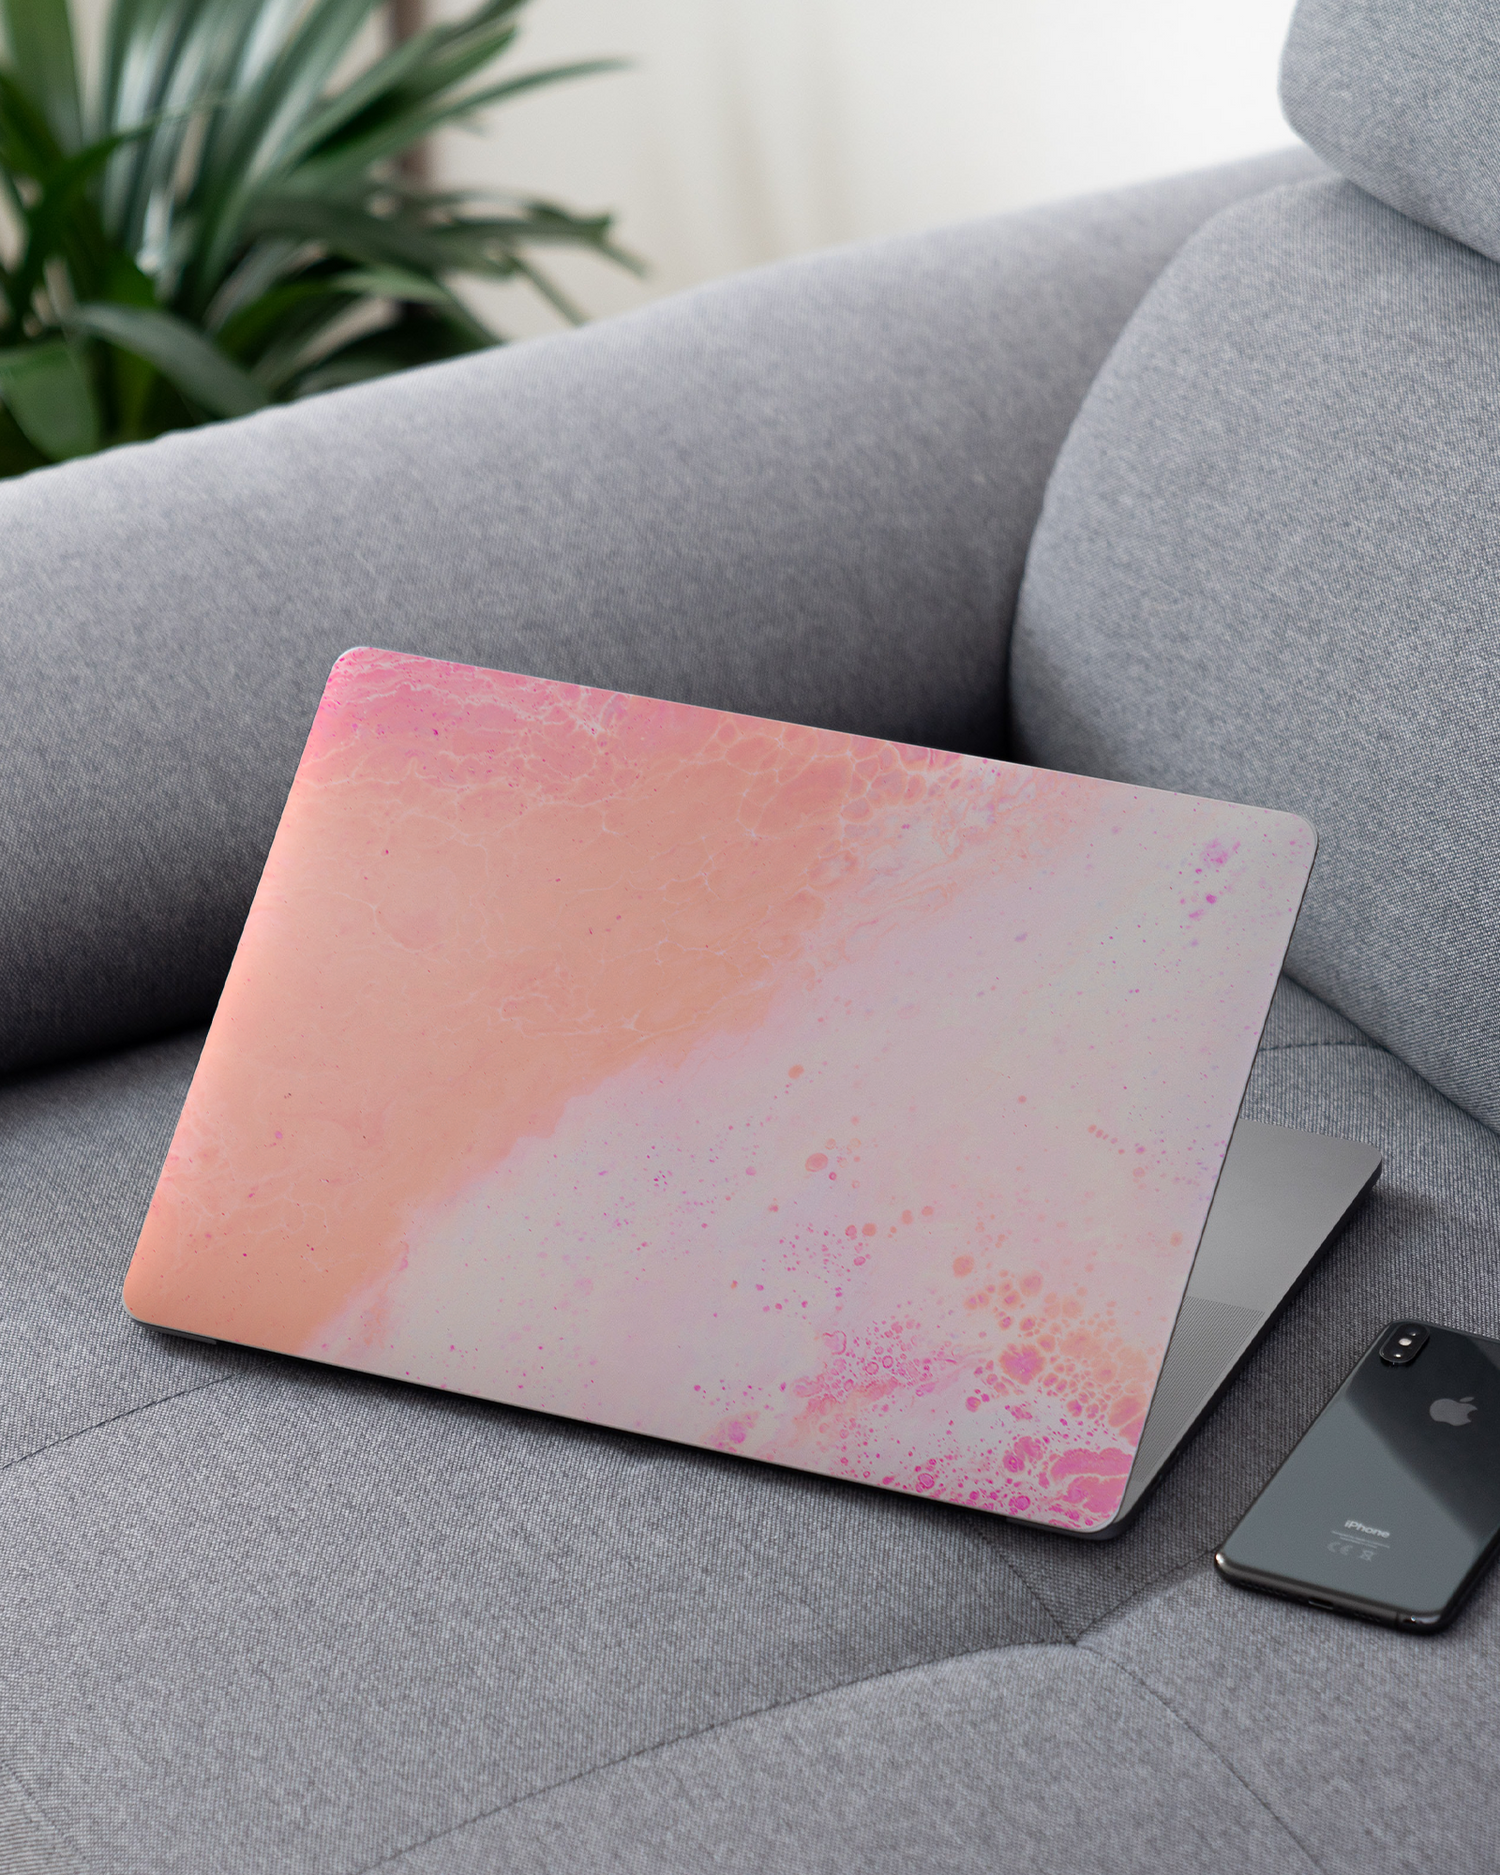 Peaches & Cream Marble Laptop Skin for 13 inch Apple MacBooks on a couch